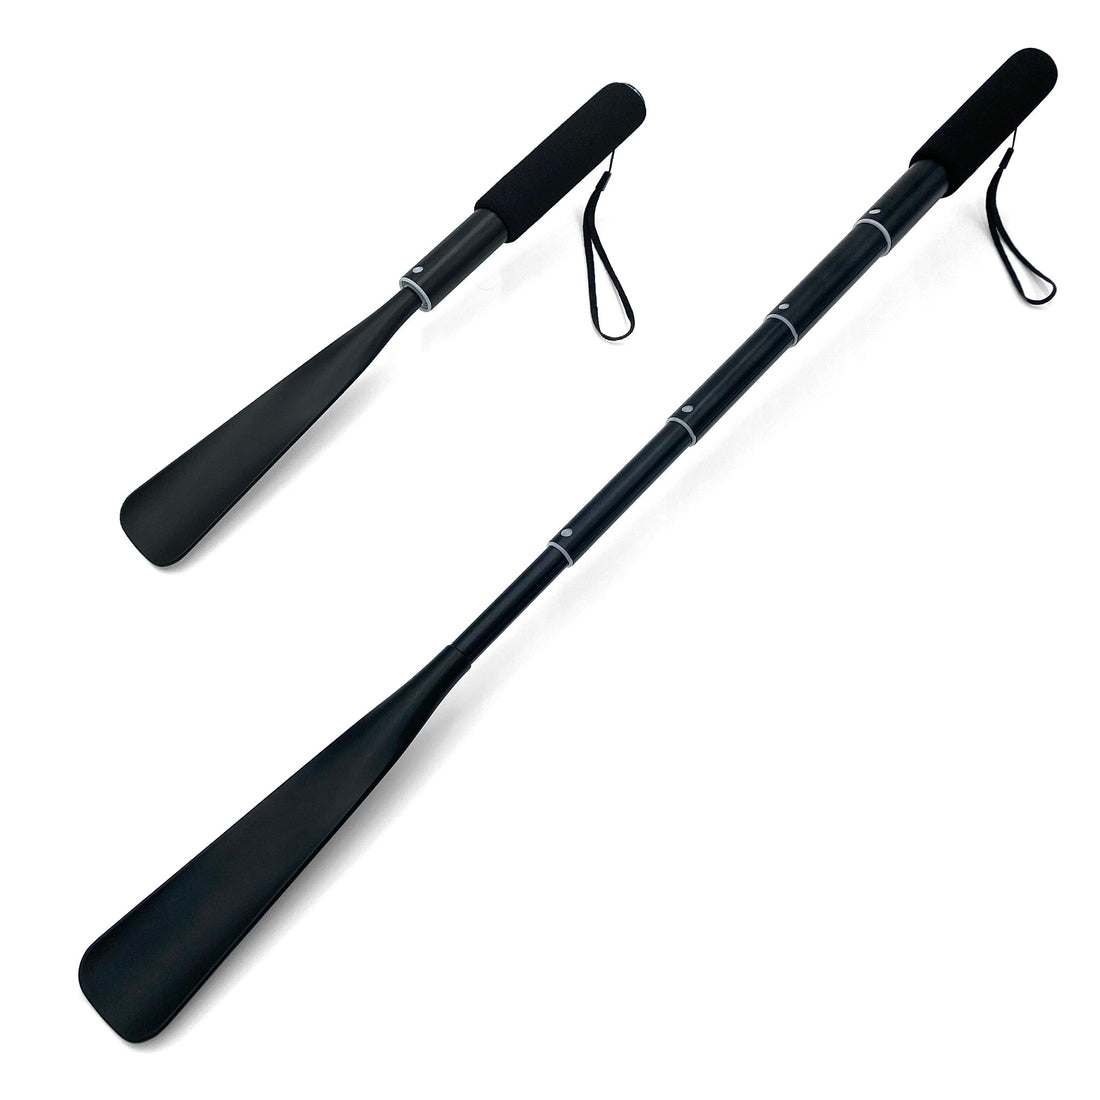 telescopic shoe horn extended and retracted